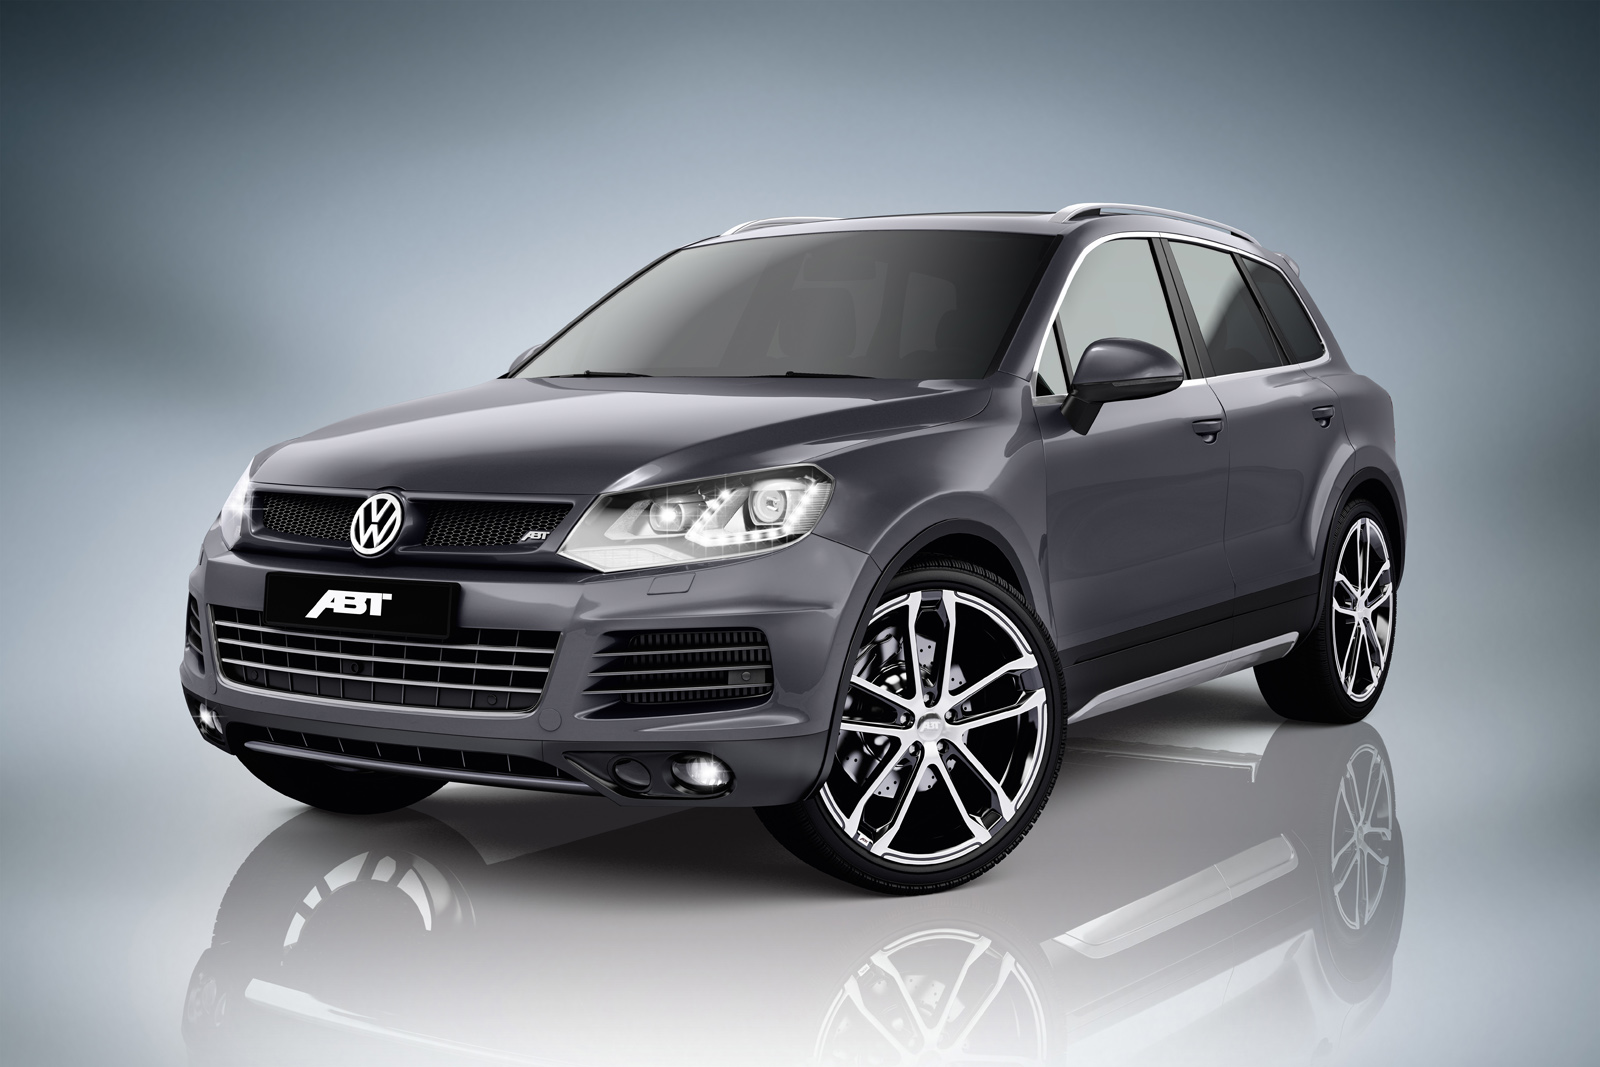 ABT Sportsline Presents Discrete Tuning Package for 2011 Volkswagen Touareg